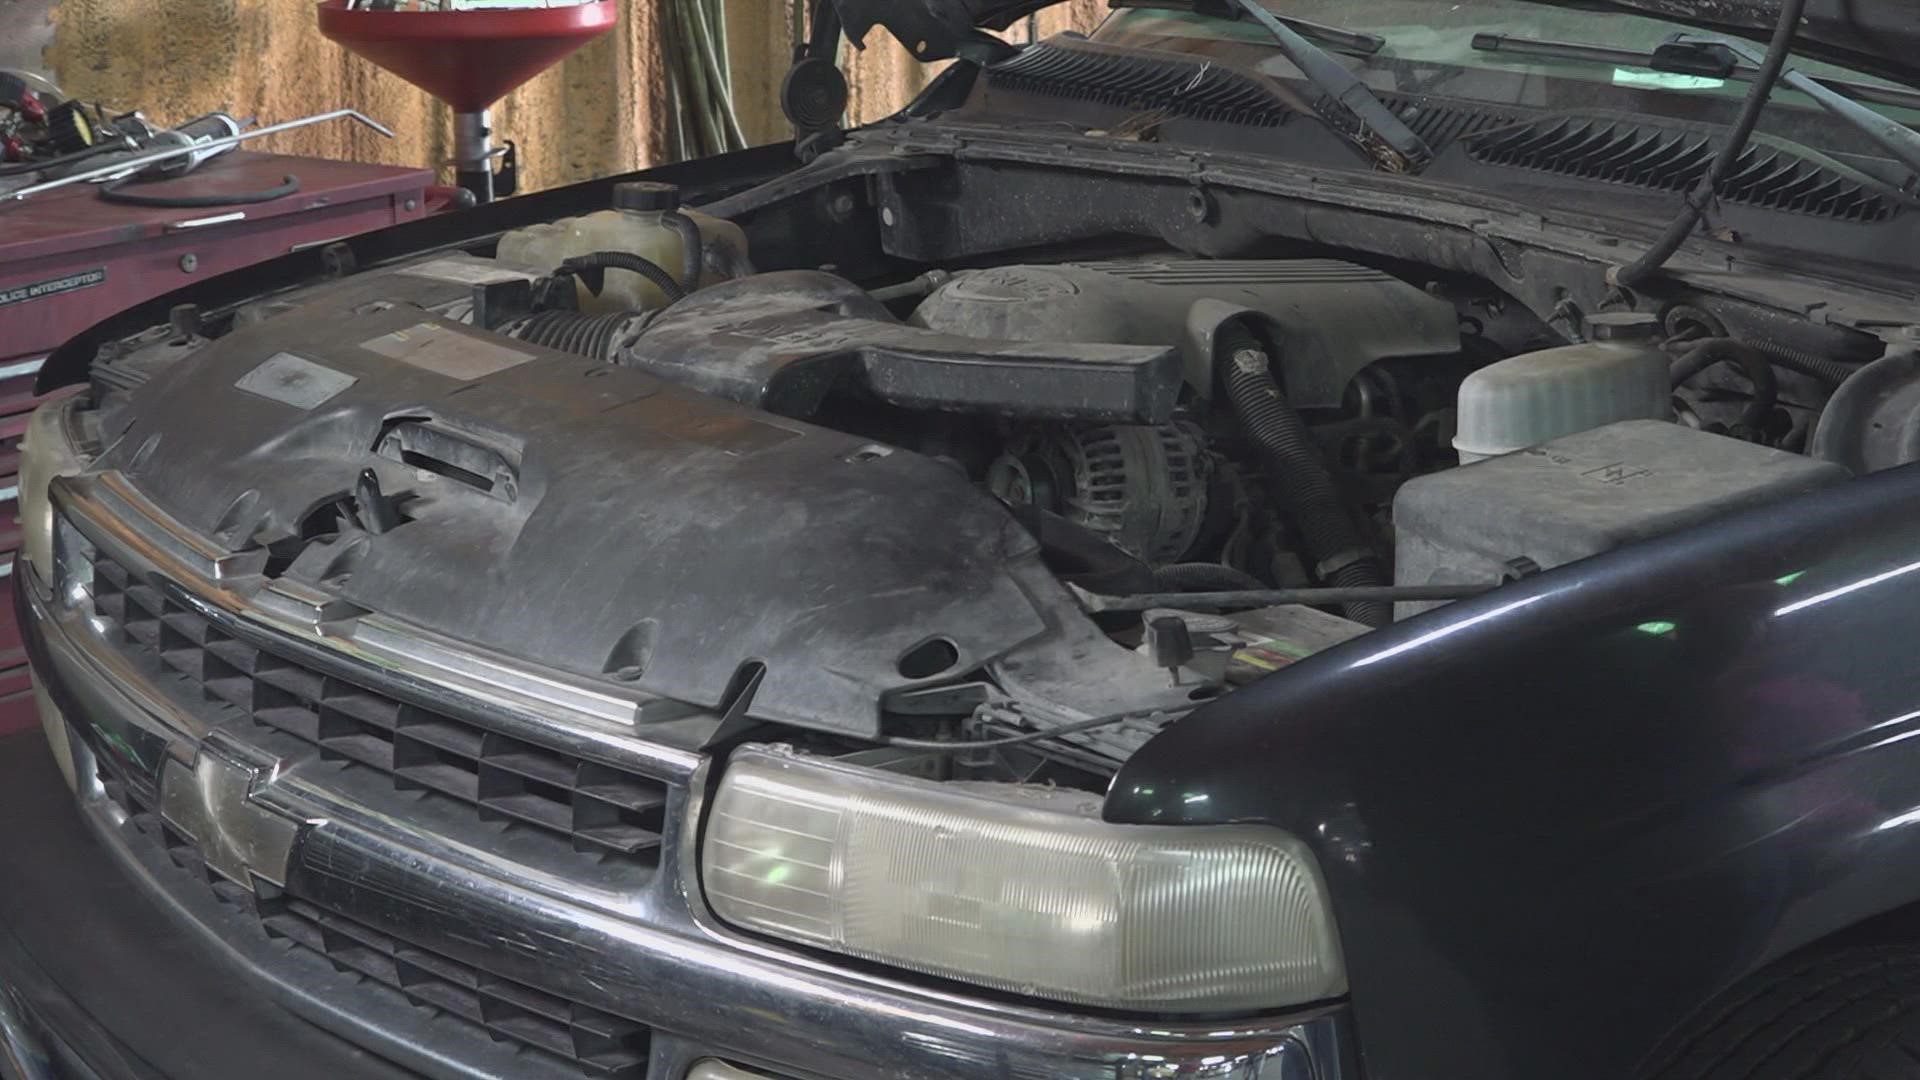 A service advisor at a Waco auto repair shop says repair costs is up 30 to 50 percent higher than it was two years ago.